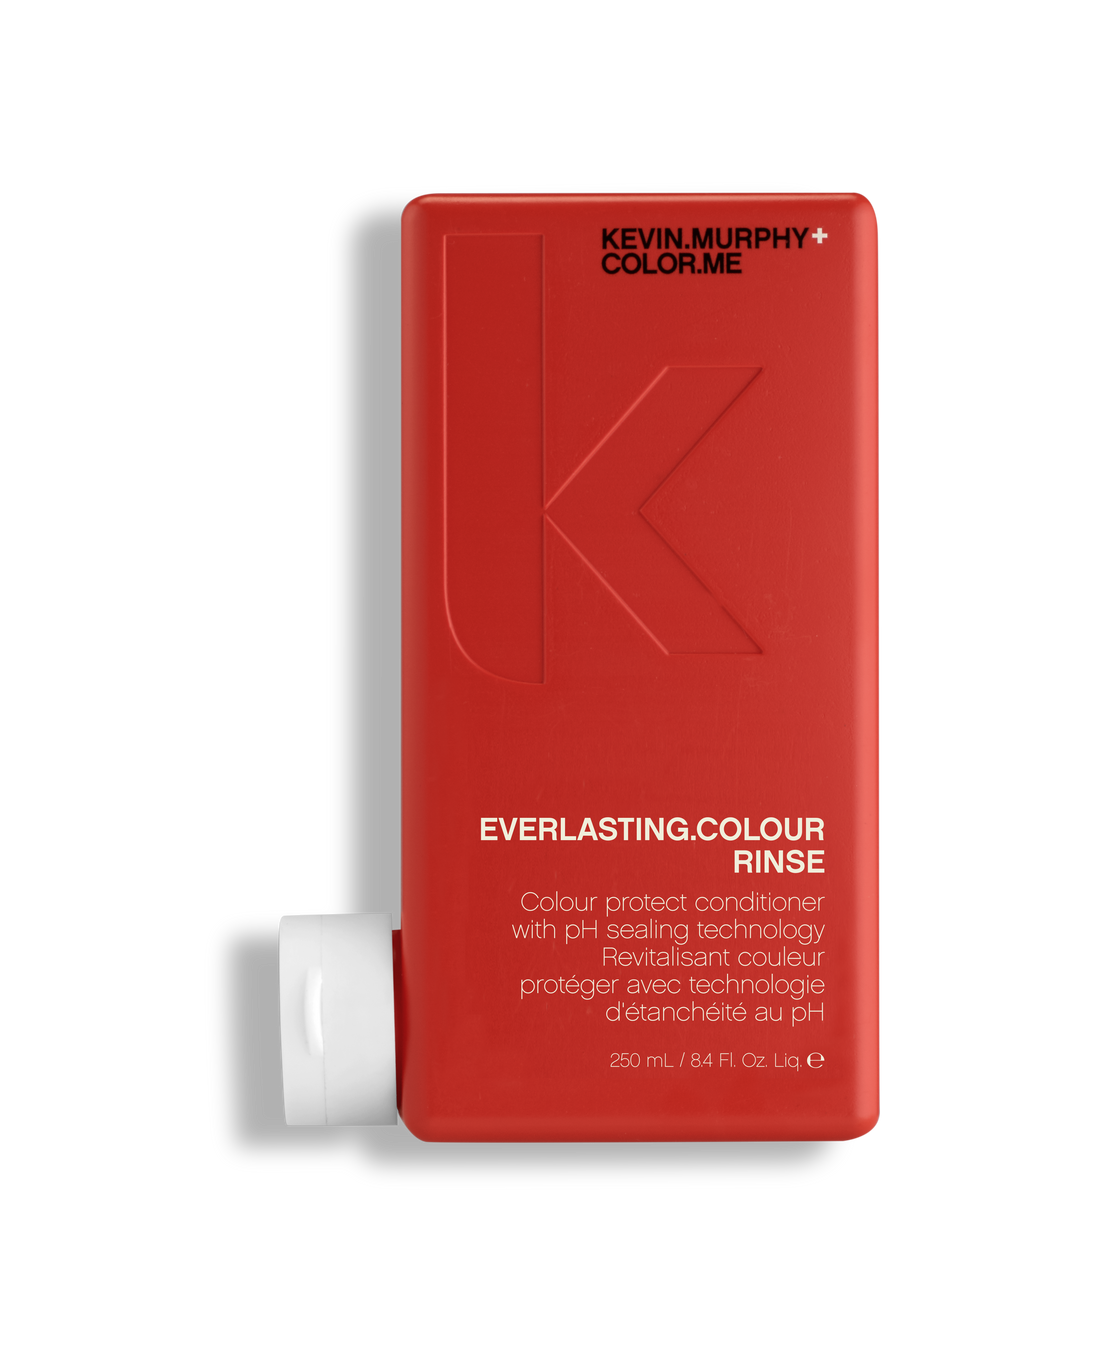 KEVIN MURPHY EVERLASTING COLOUR RINSE 250ml